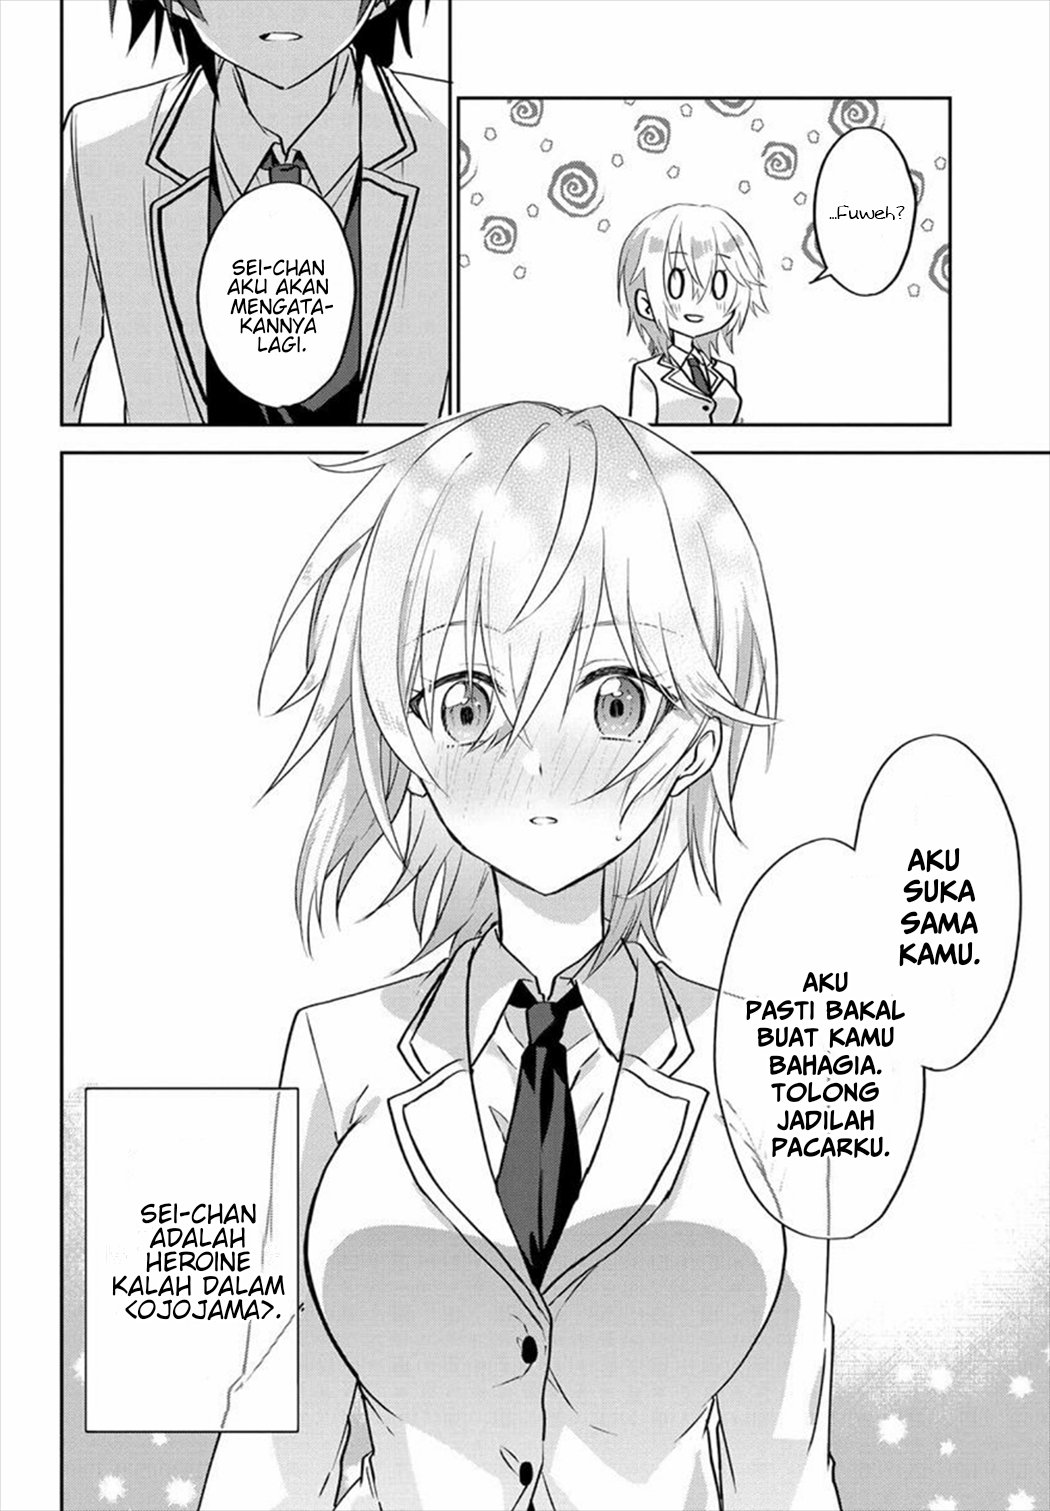 Since I'Ve Entered The World Of Romantic Comedy Manga, I'Ll Do My Best To Make The Losing Heroine Happy. Chapter 1 - 245